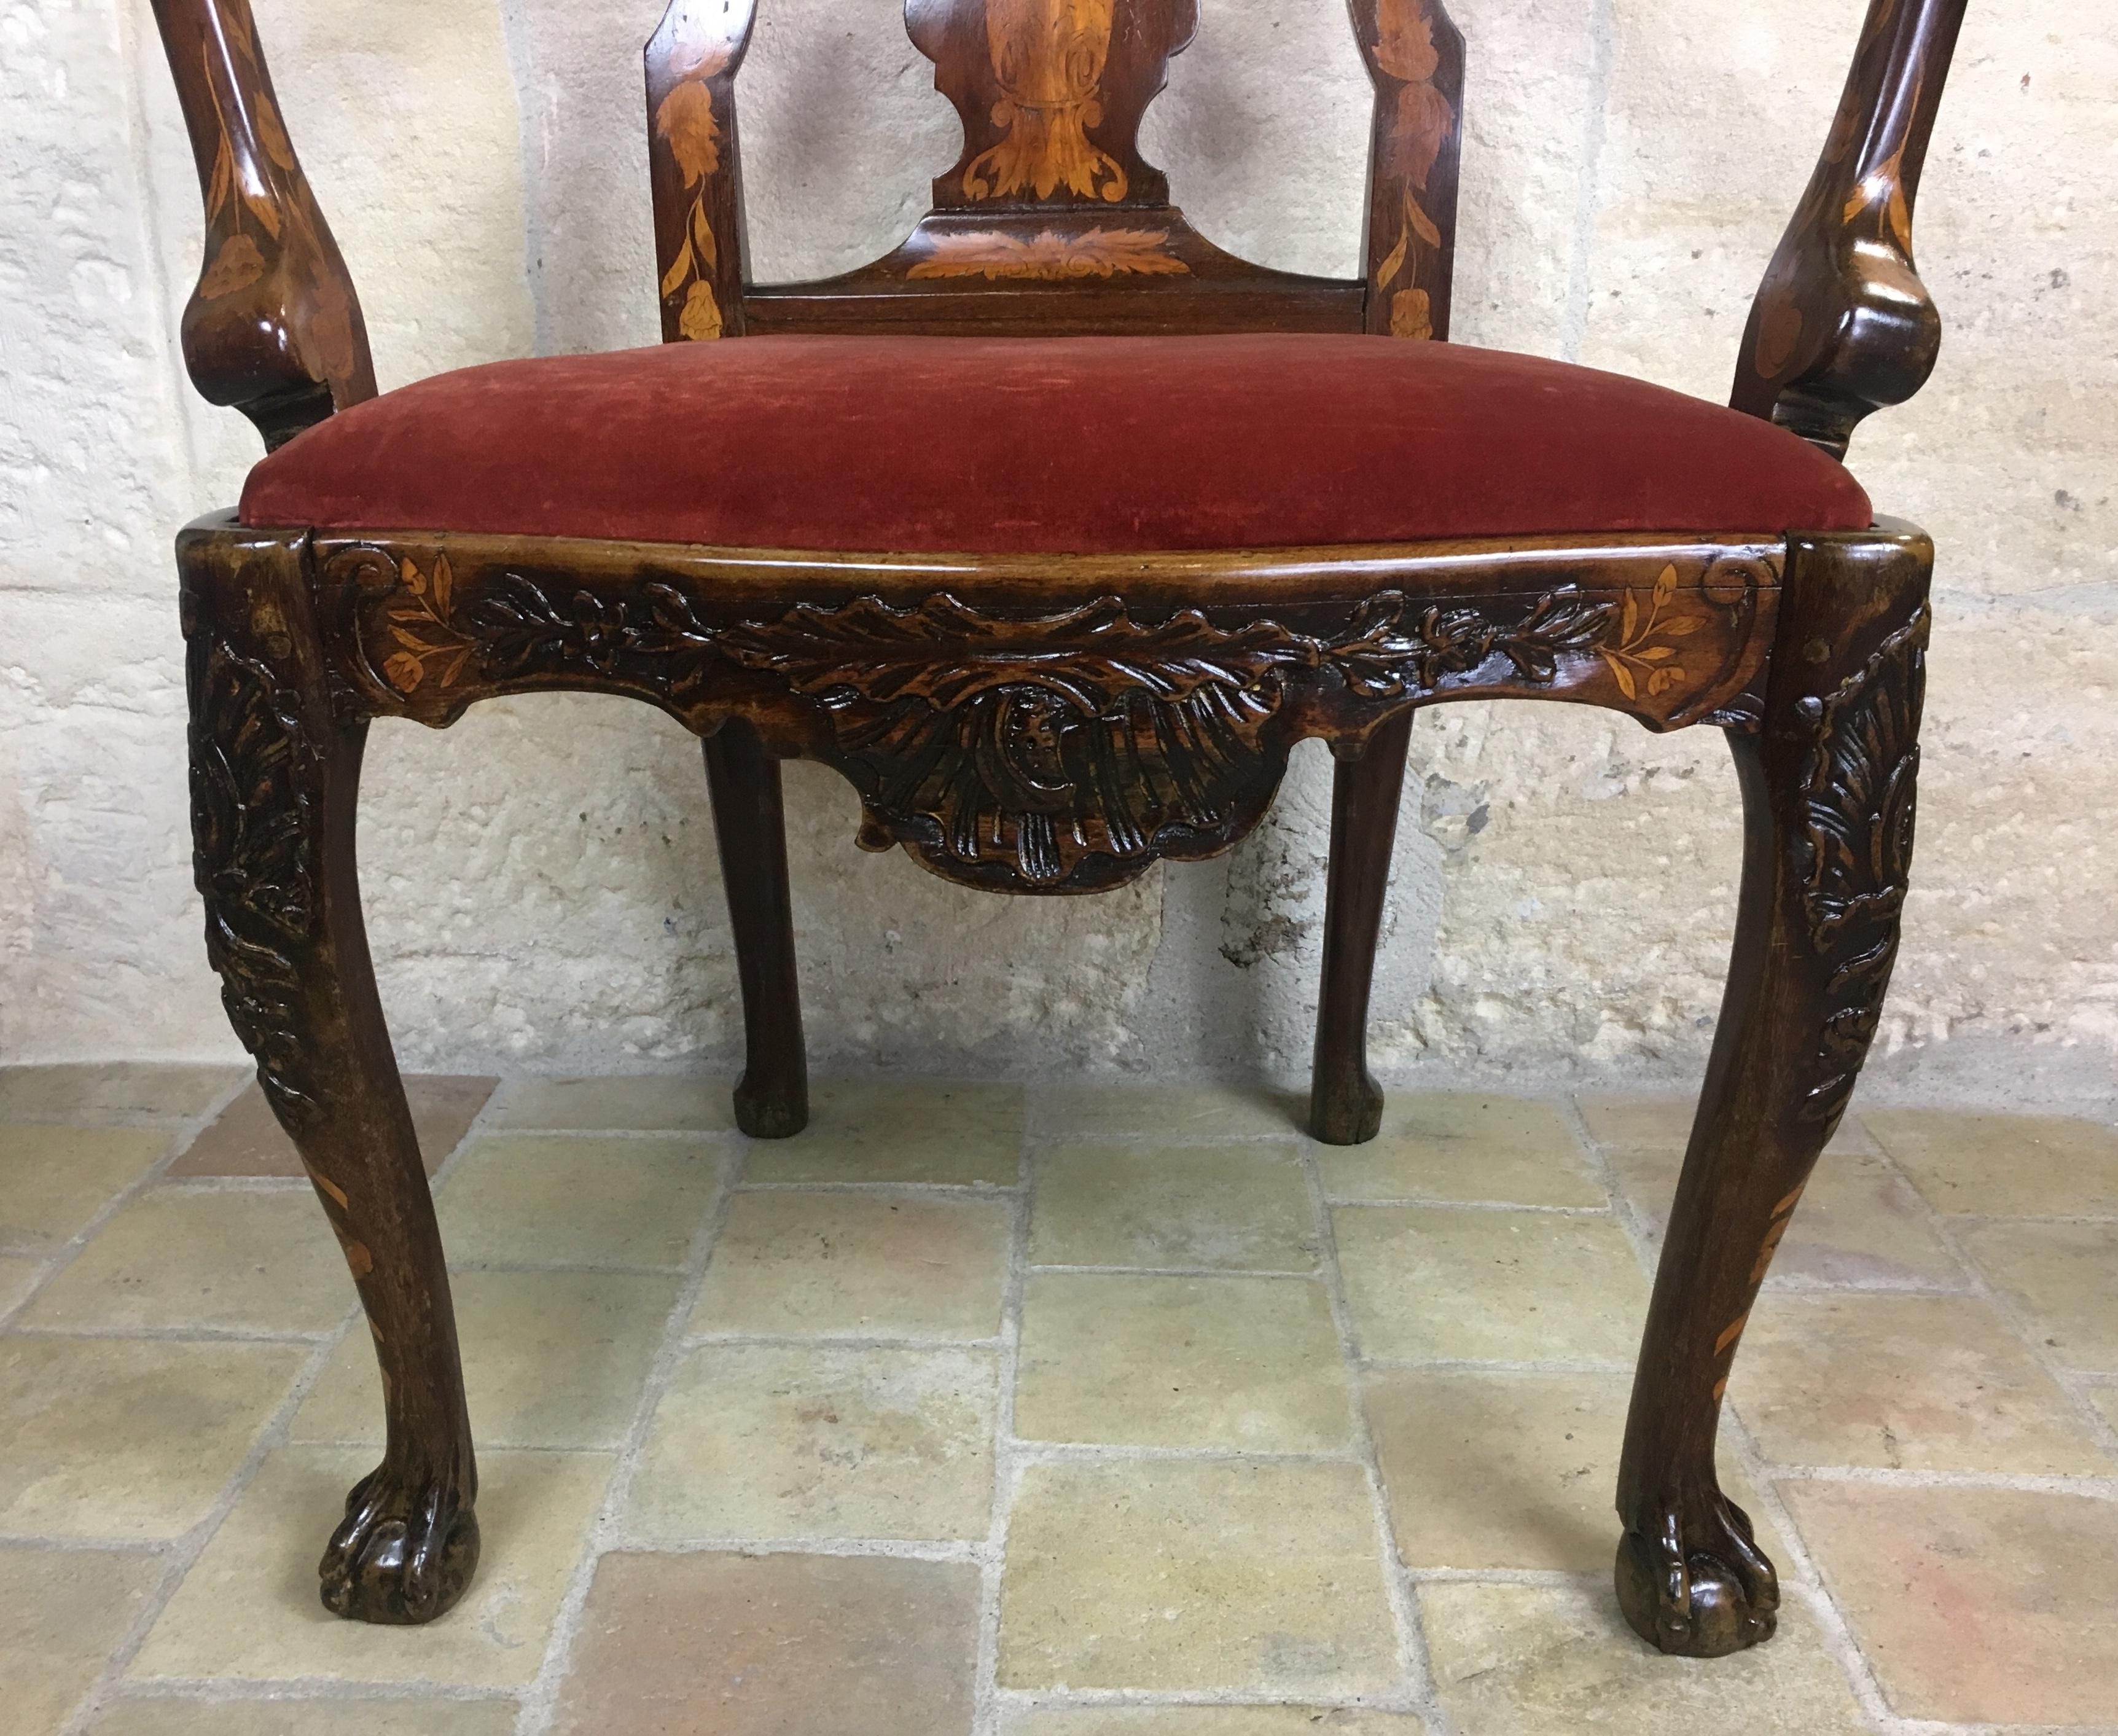 This is a rare Dutch marquetry arm chair that has lived a long life and is now ready to show itself off in just that right spot in your home. The satinwood inlay work on this chair is remarkable and intact. 

The chair sits on Queen Anne style legs